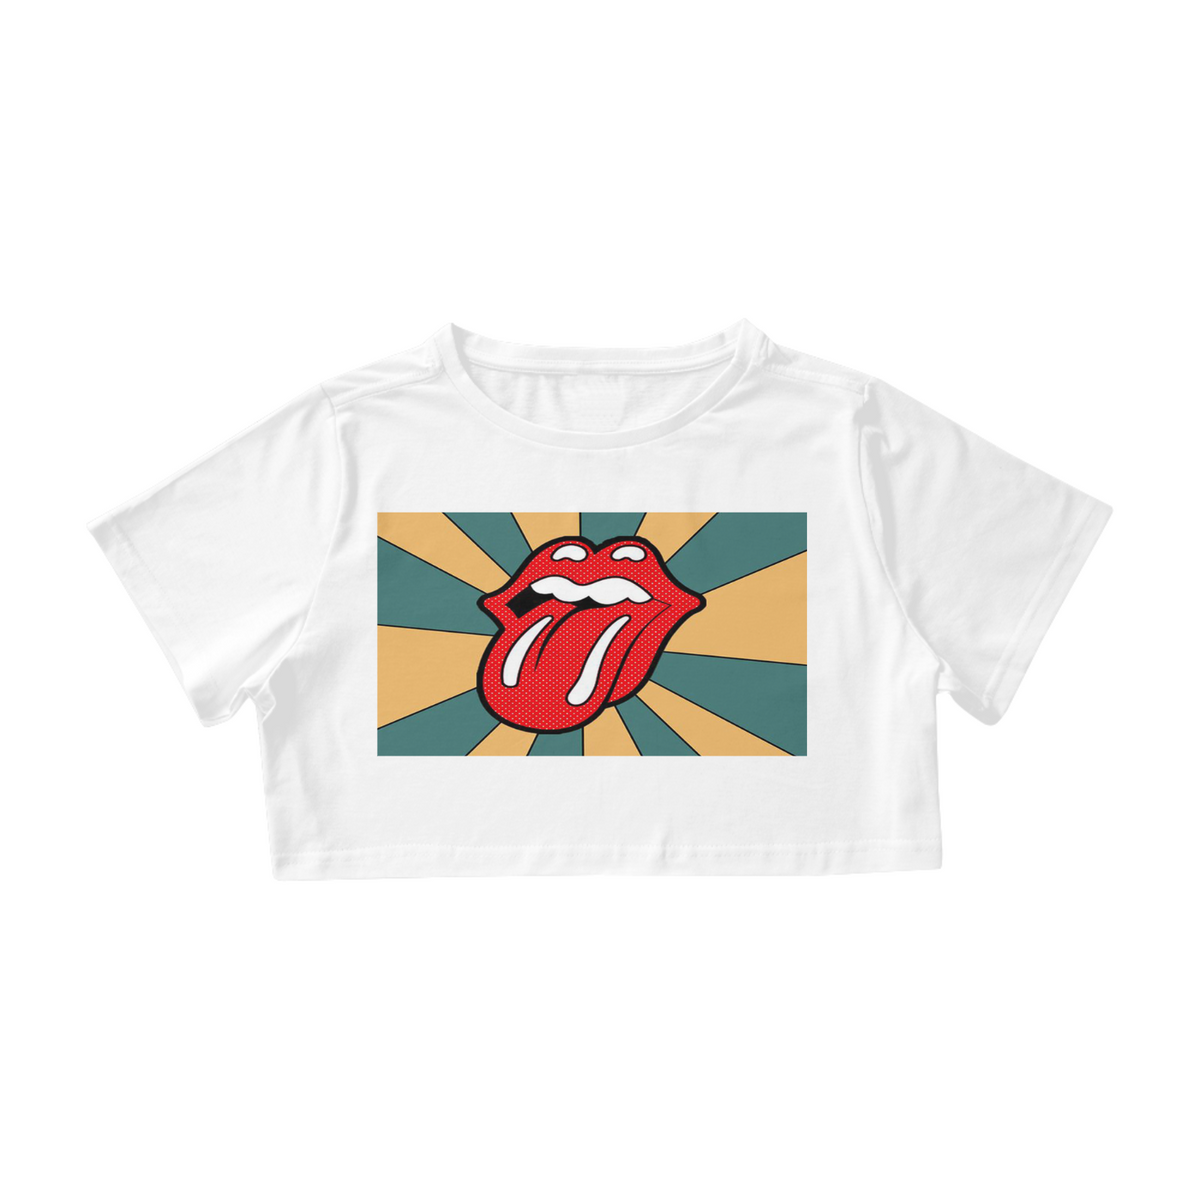 Nome do produtoCropped Rolling Stones 